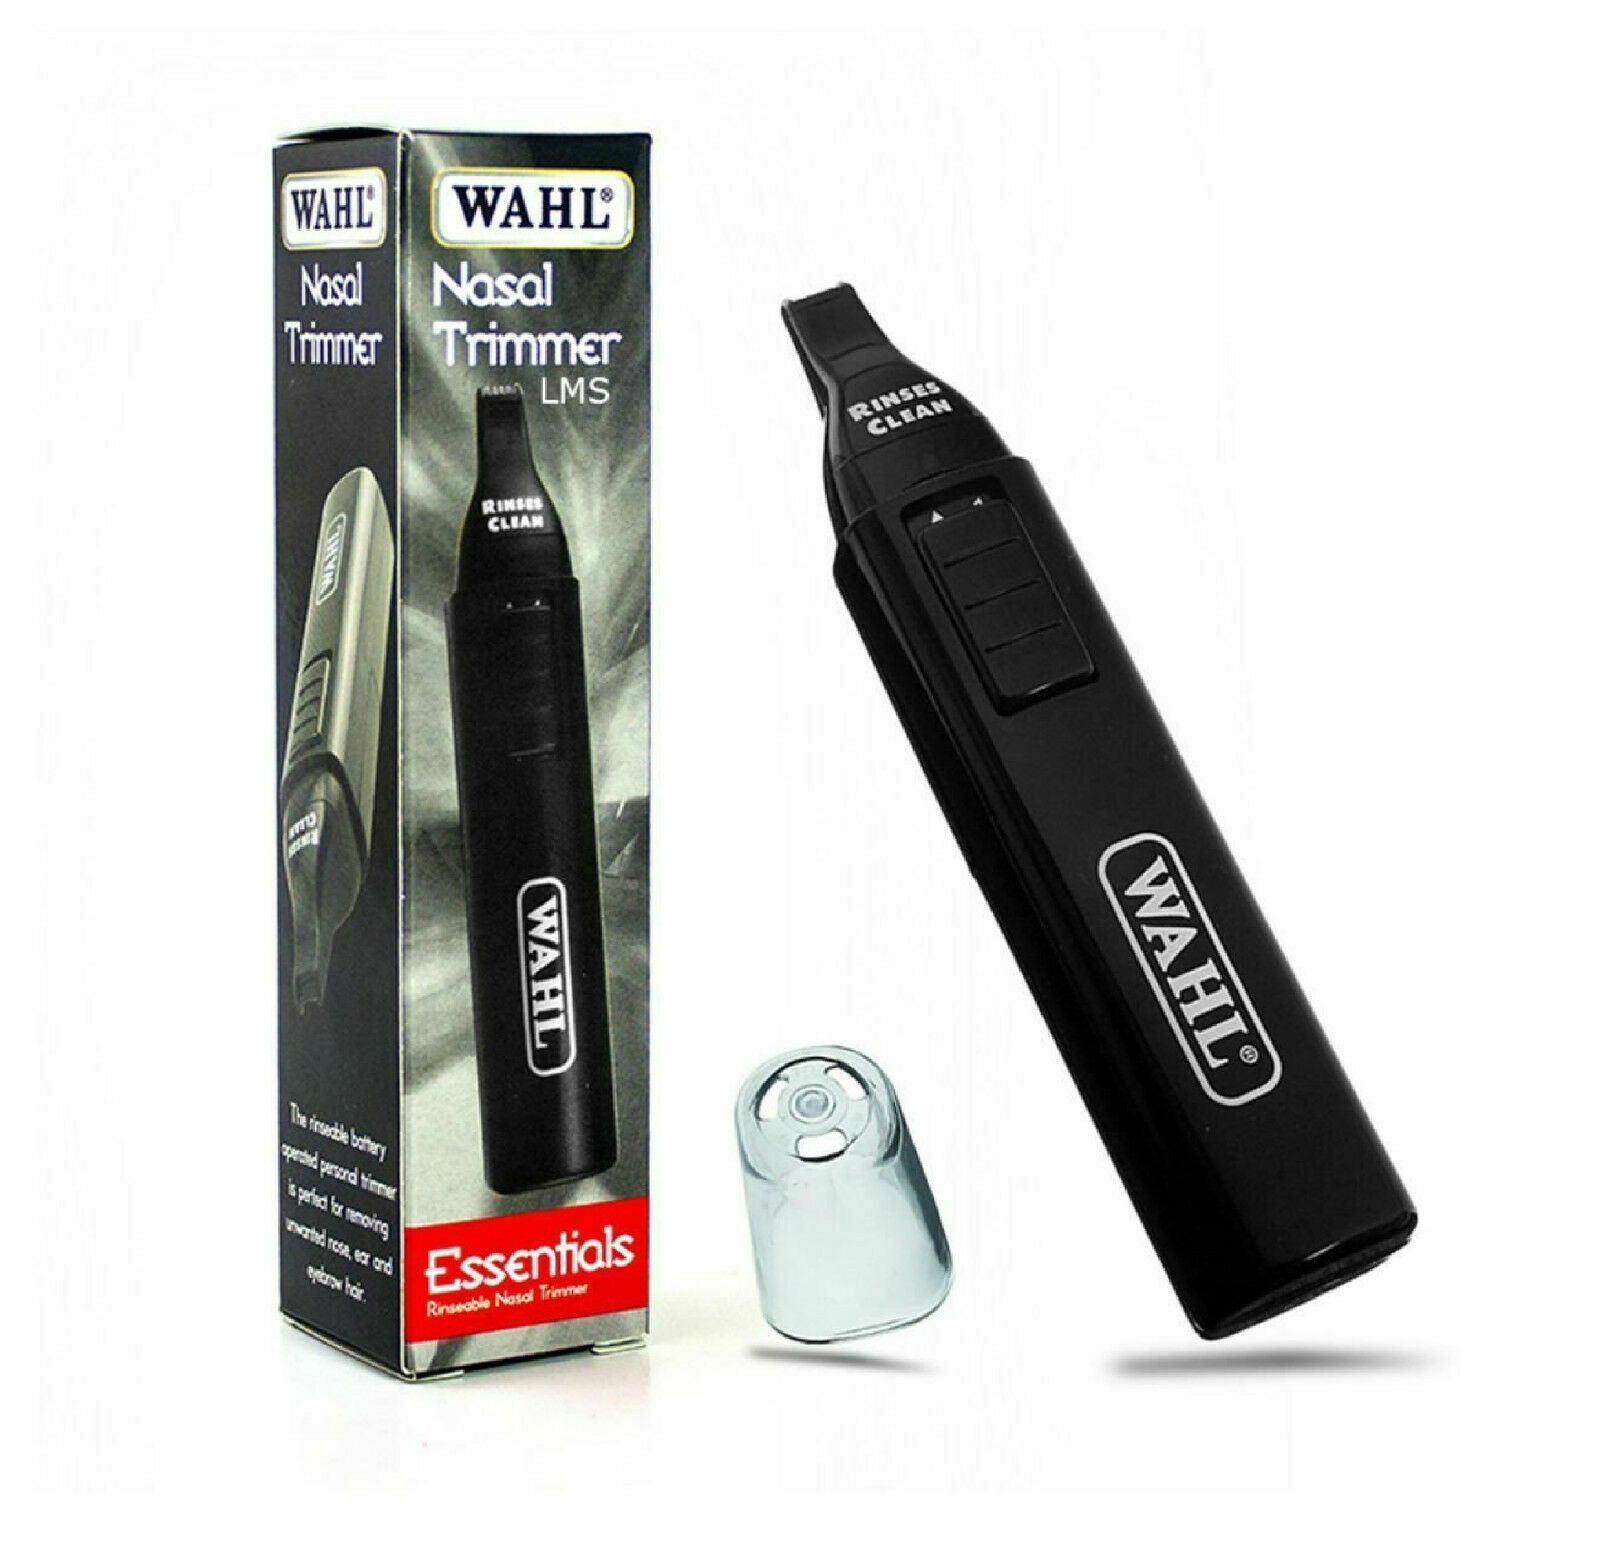 WAHL NASAL EAR AND NOSE HAIR TRIMMER CLIPPER BRAND NEW - 5560-917  5055538677779 | eBay